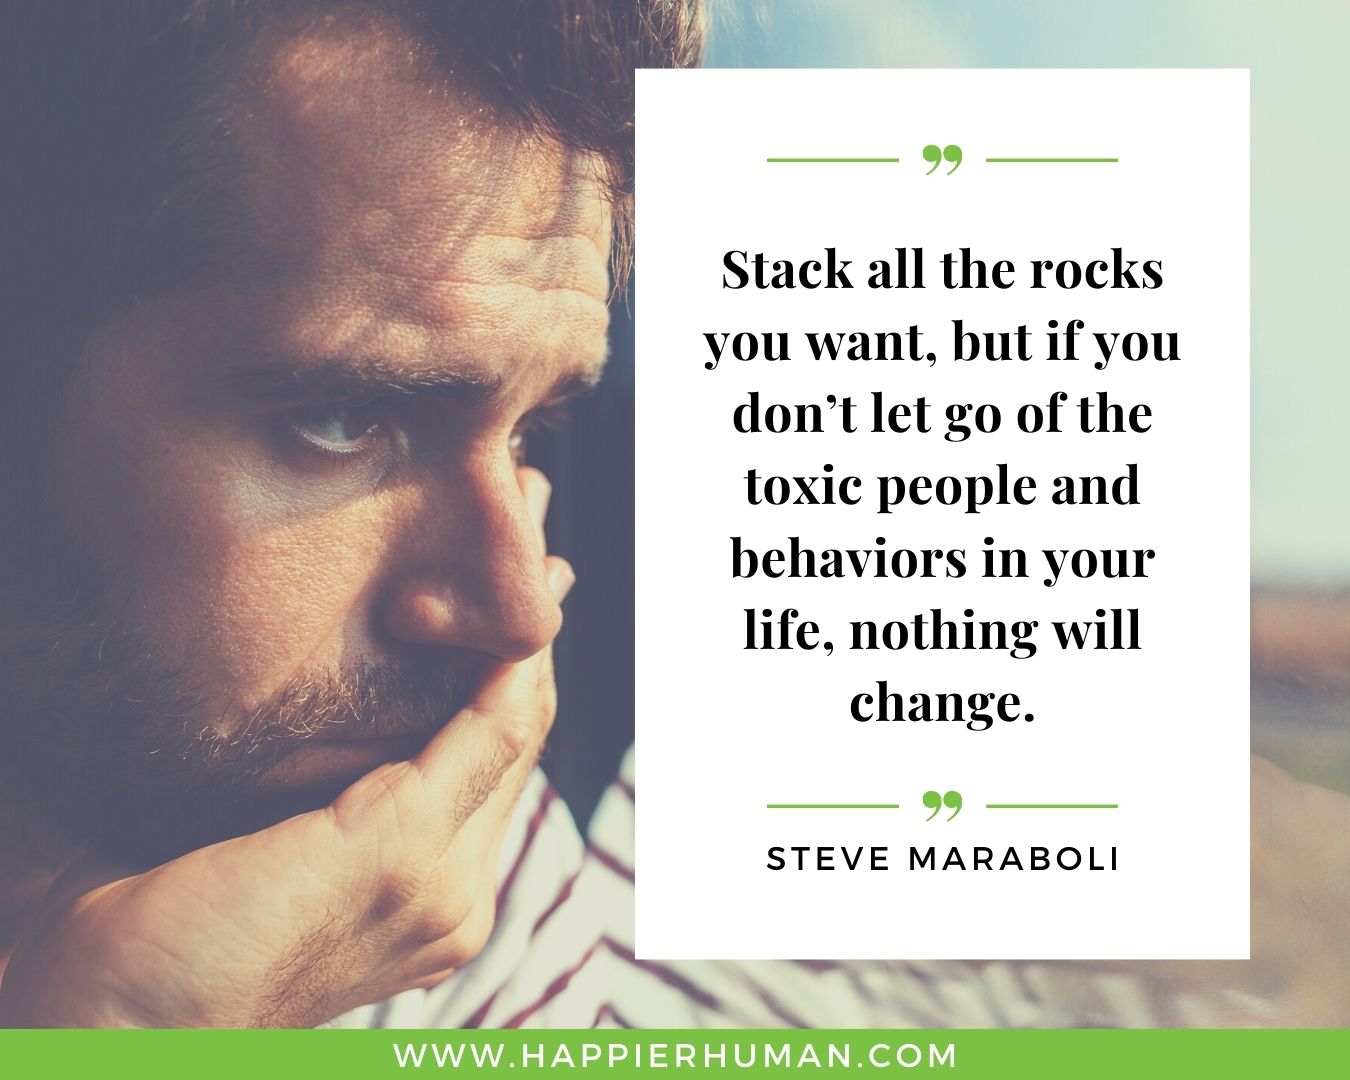 Toxic People Quotes - “Stack all the rocks you want, but if you don’t let go of the toxic people and behaviors in your life, nothing will change.” – Steve Maraboli